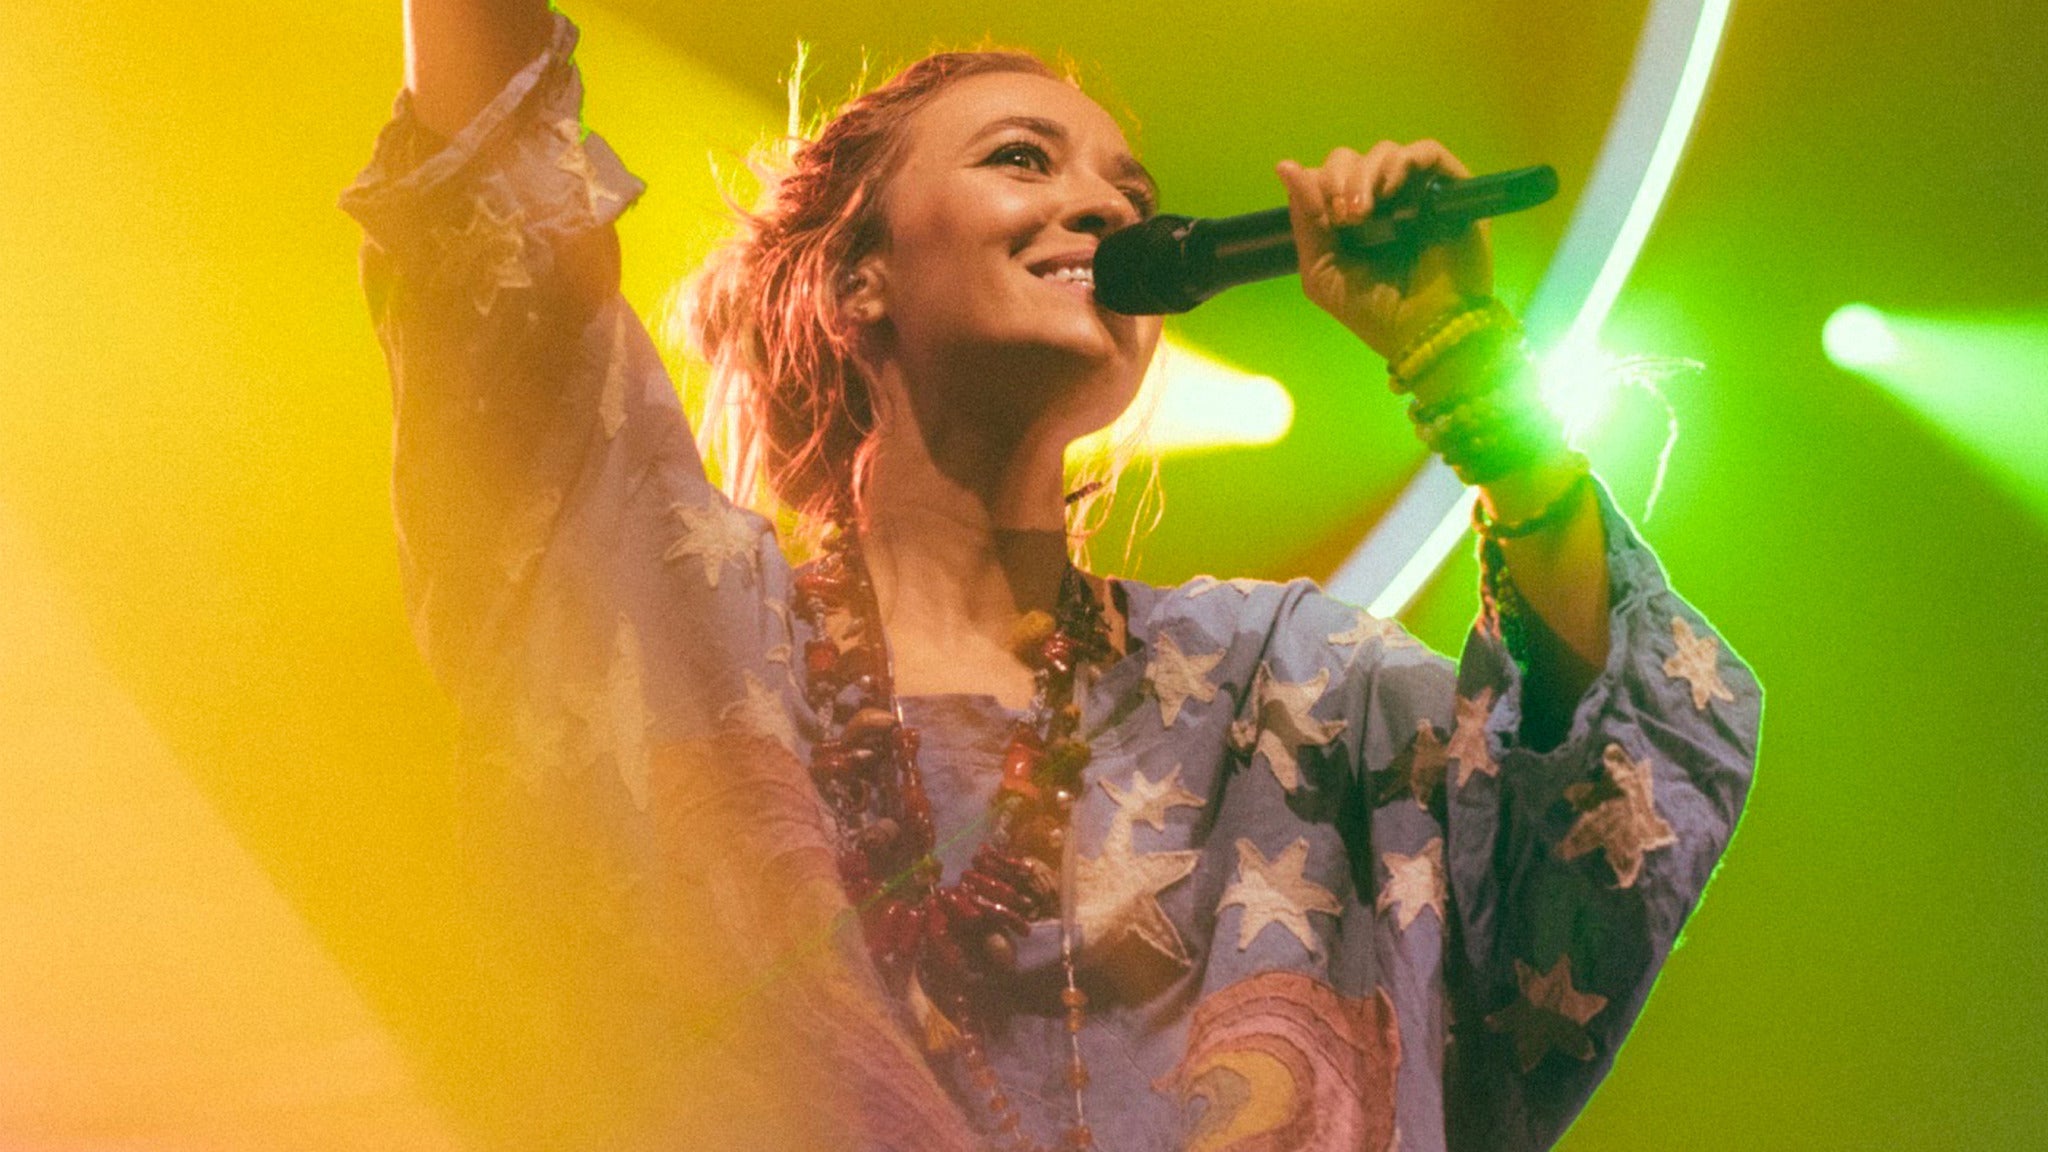 Lauren Daigle: Behold Tour 2022 in New Orleans event information